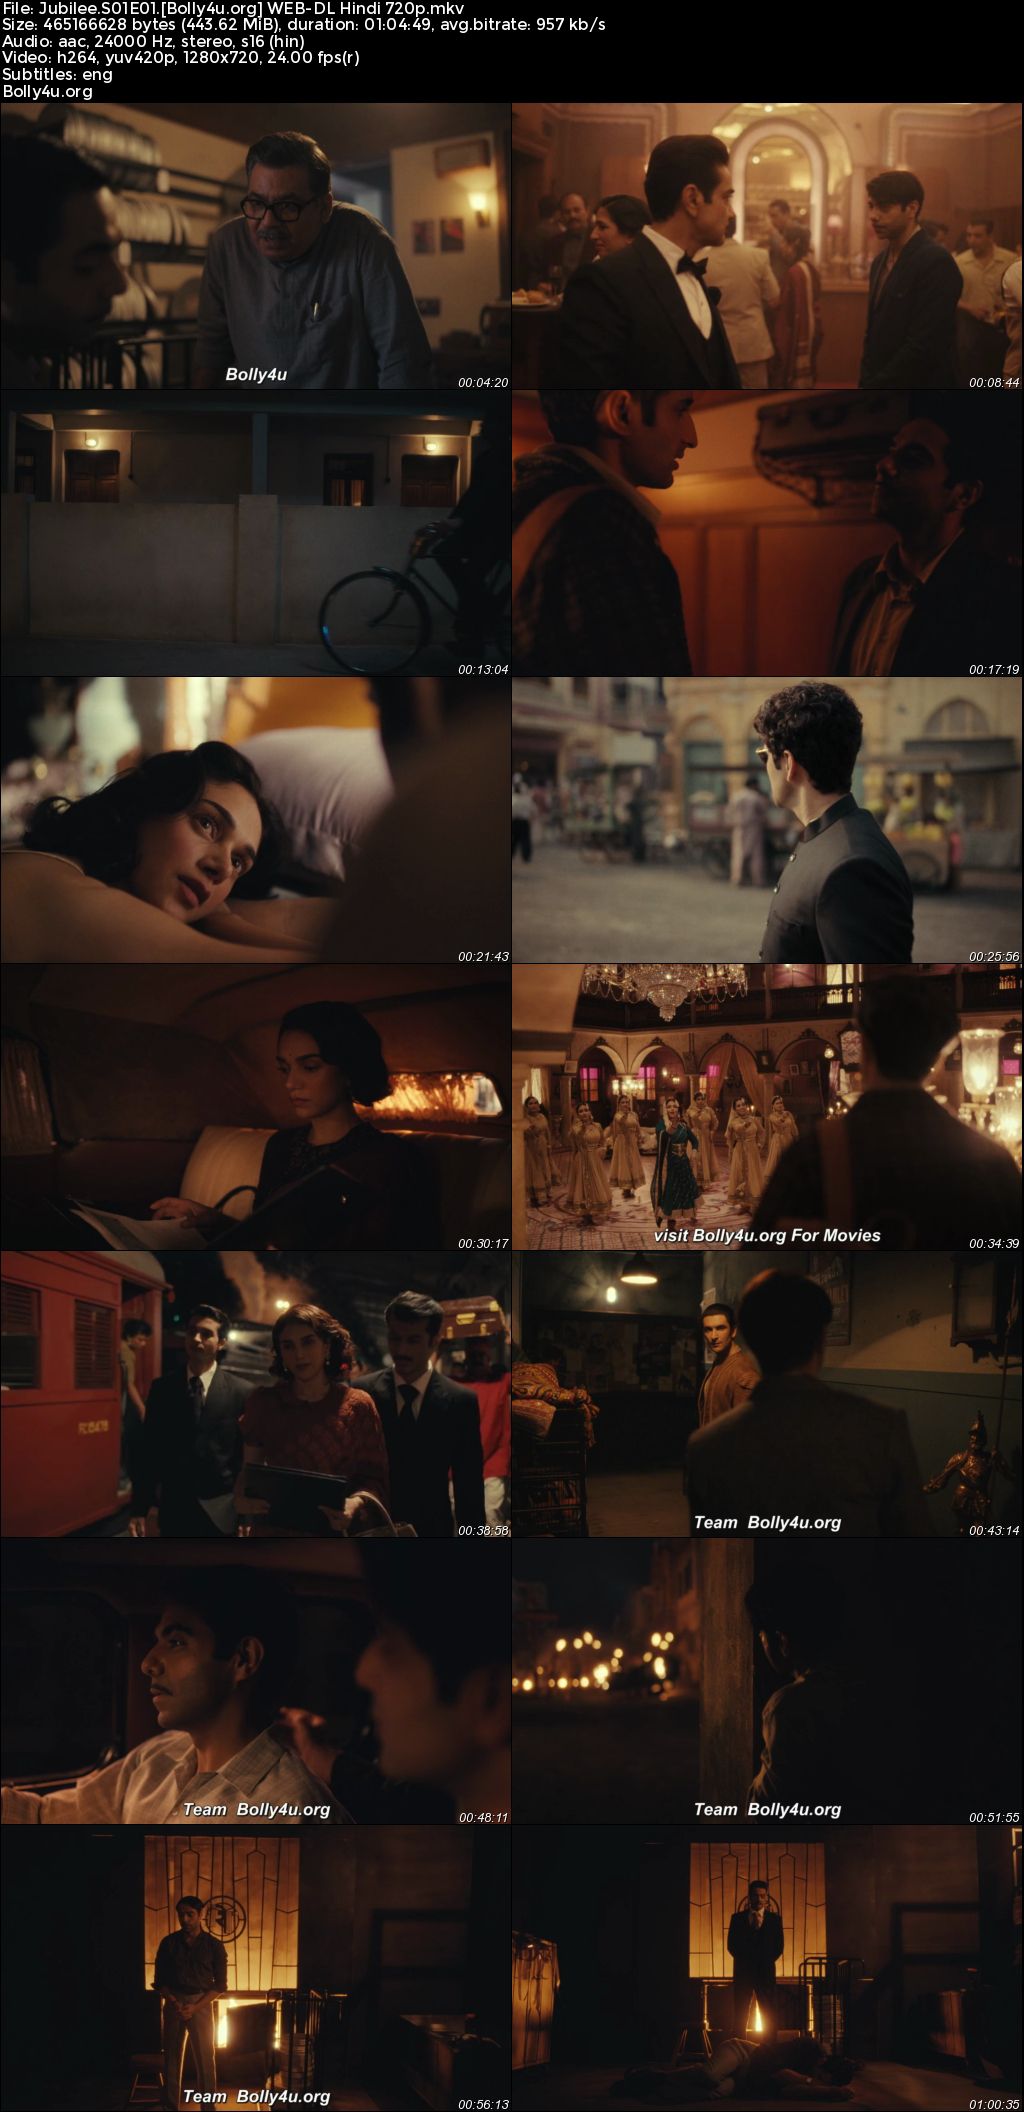 Jubilee 2023 WEB-DL Hindi S01 Complete Download 720p